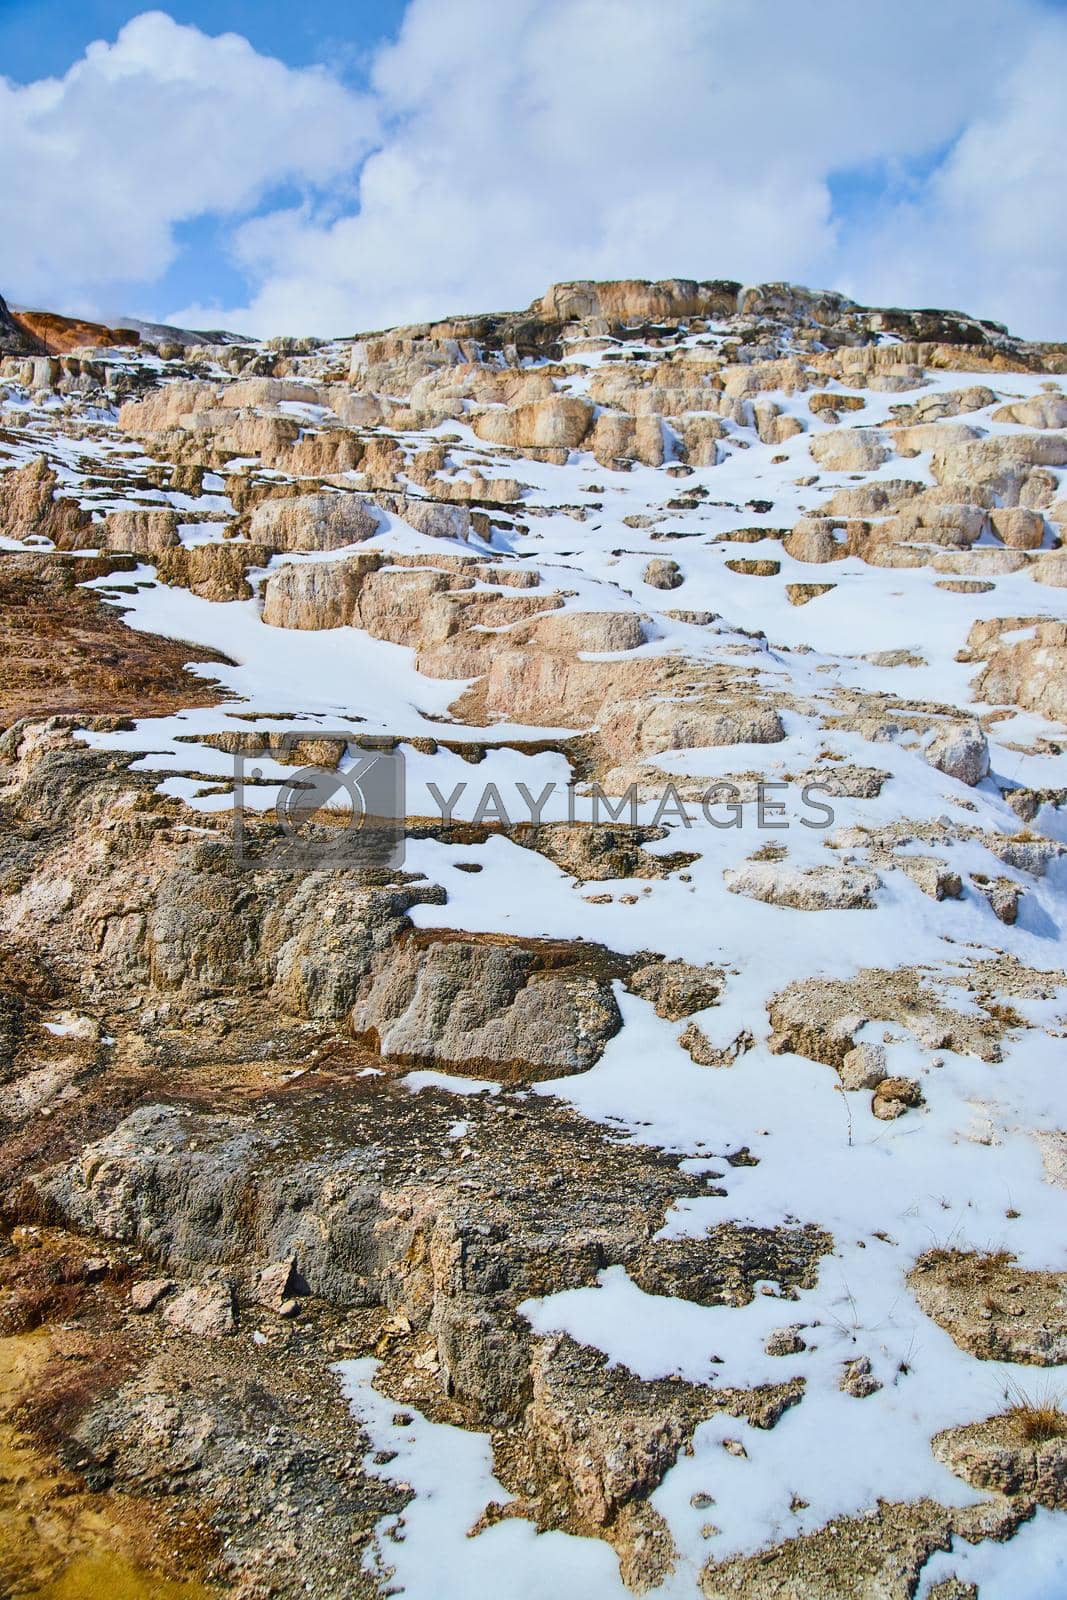 Royalty free image of Yellowstone Hot Springs filled with snow during winter by njproductions